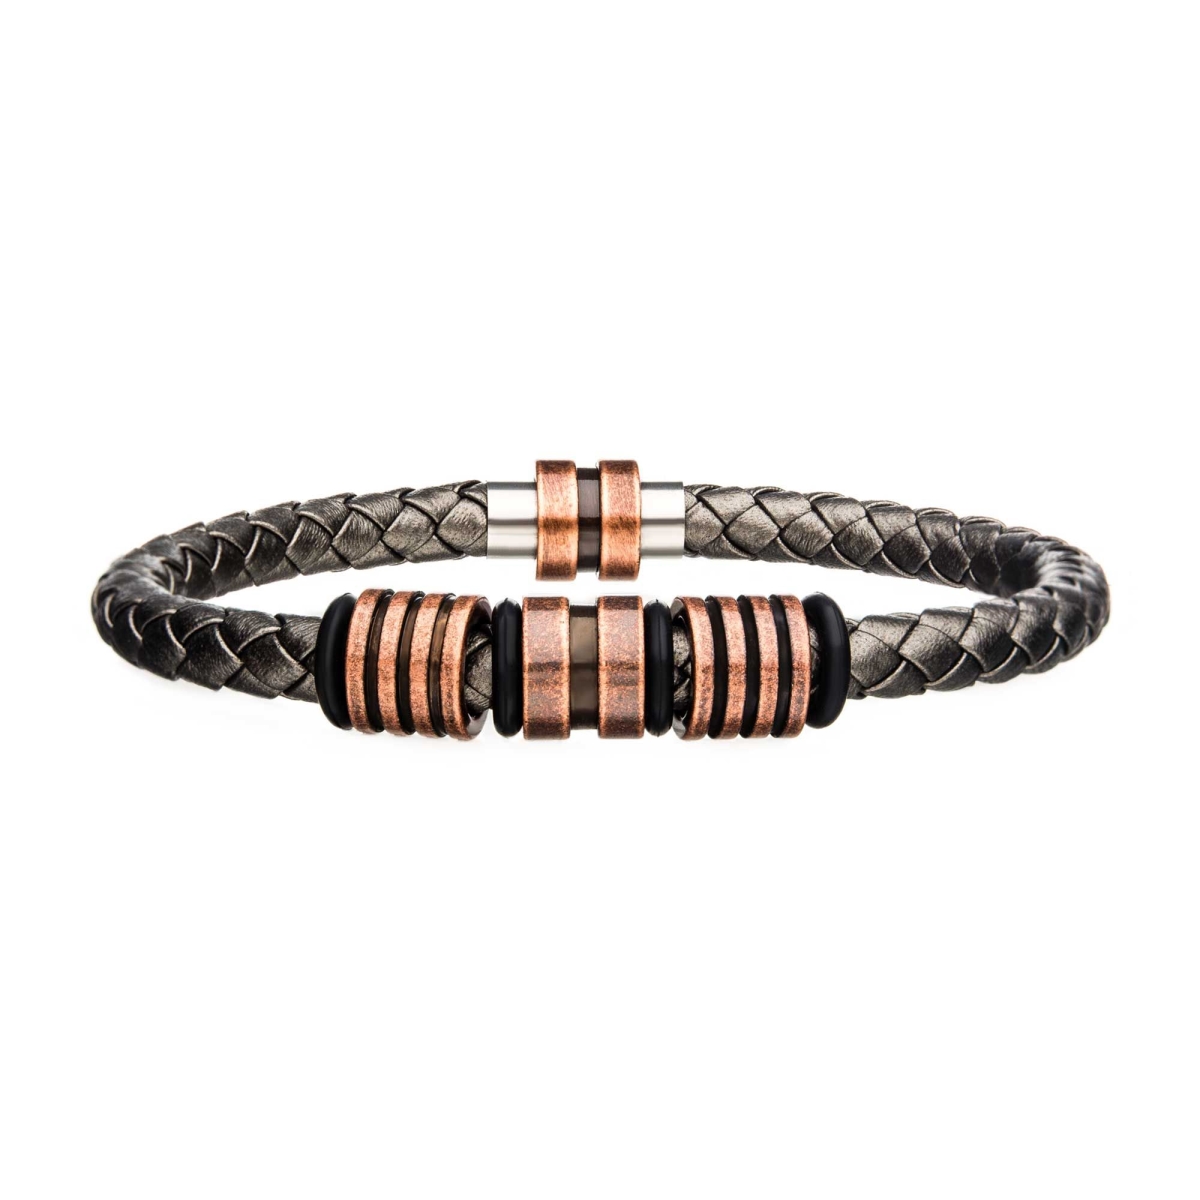 Br27564 8.25 In. Mens Grey Braided Leather Copper Beads Bracelet